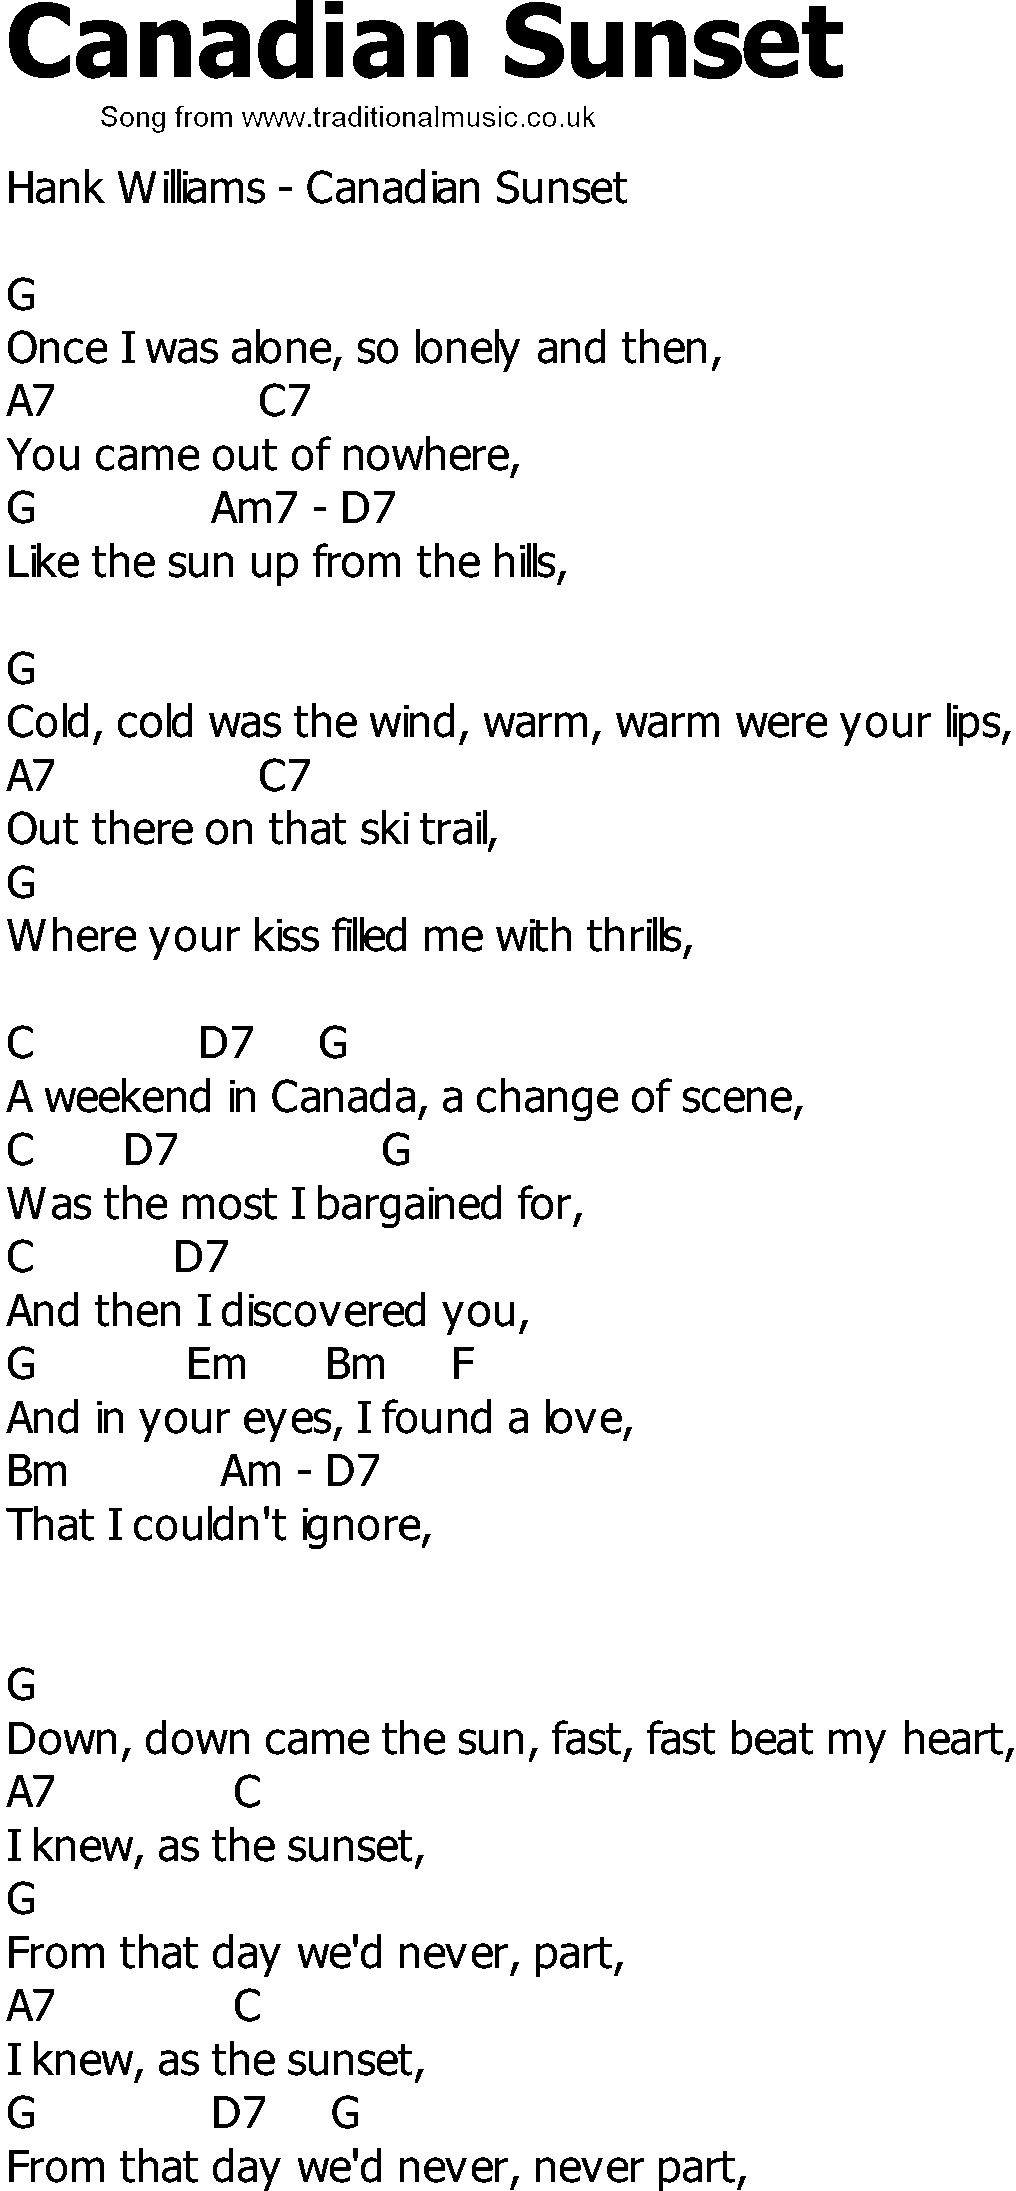 Old Country song lyrics with chords - Canadian Sunset